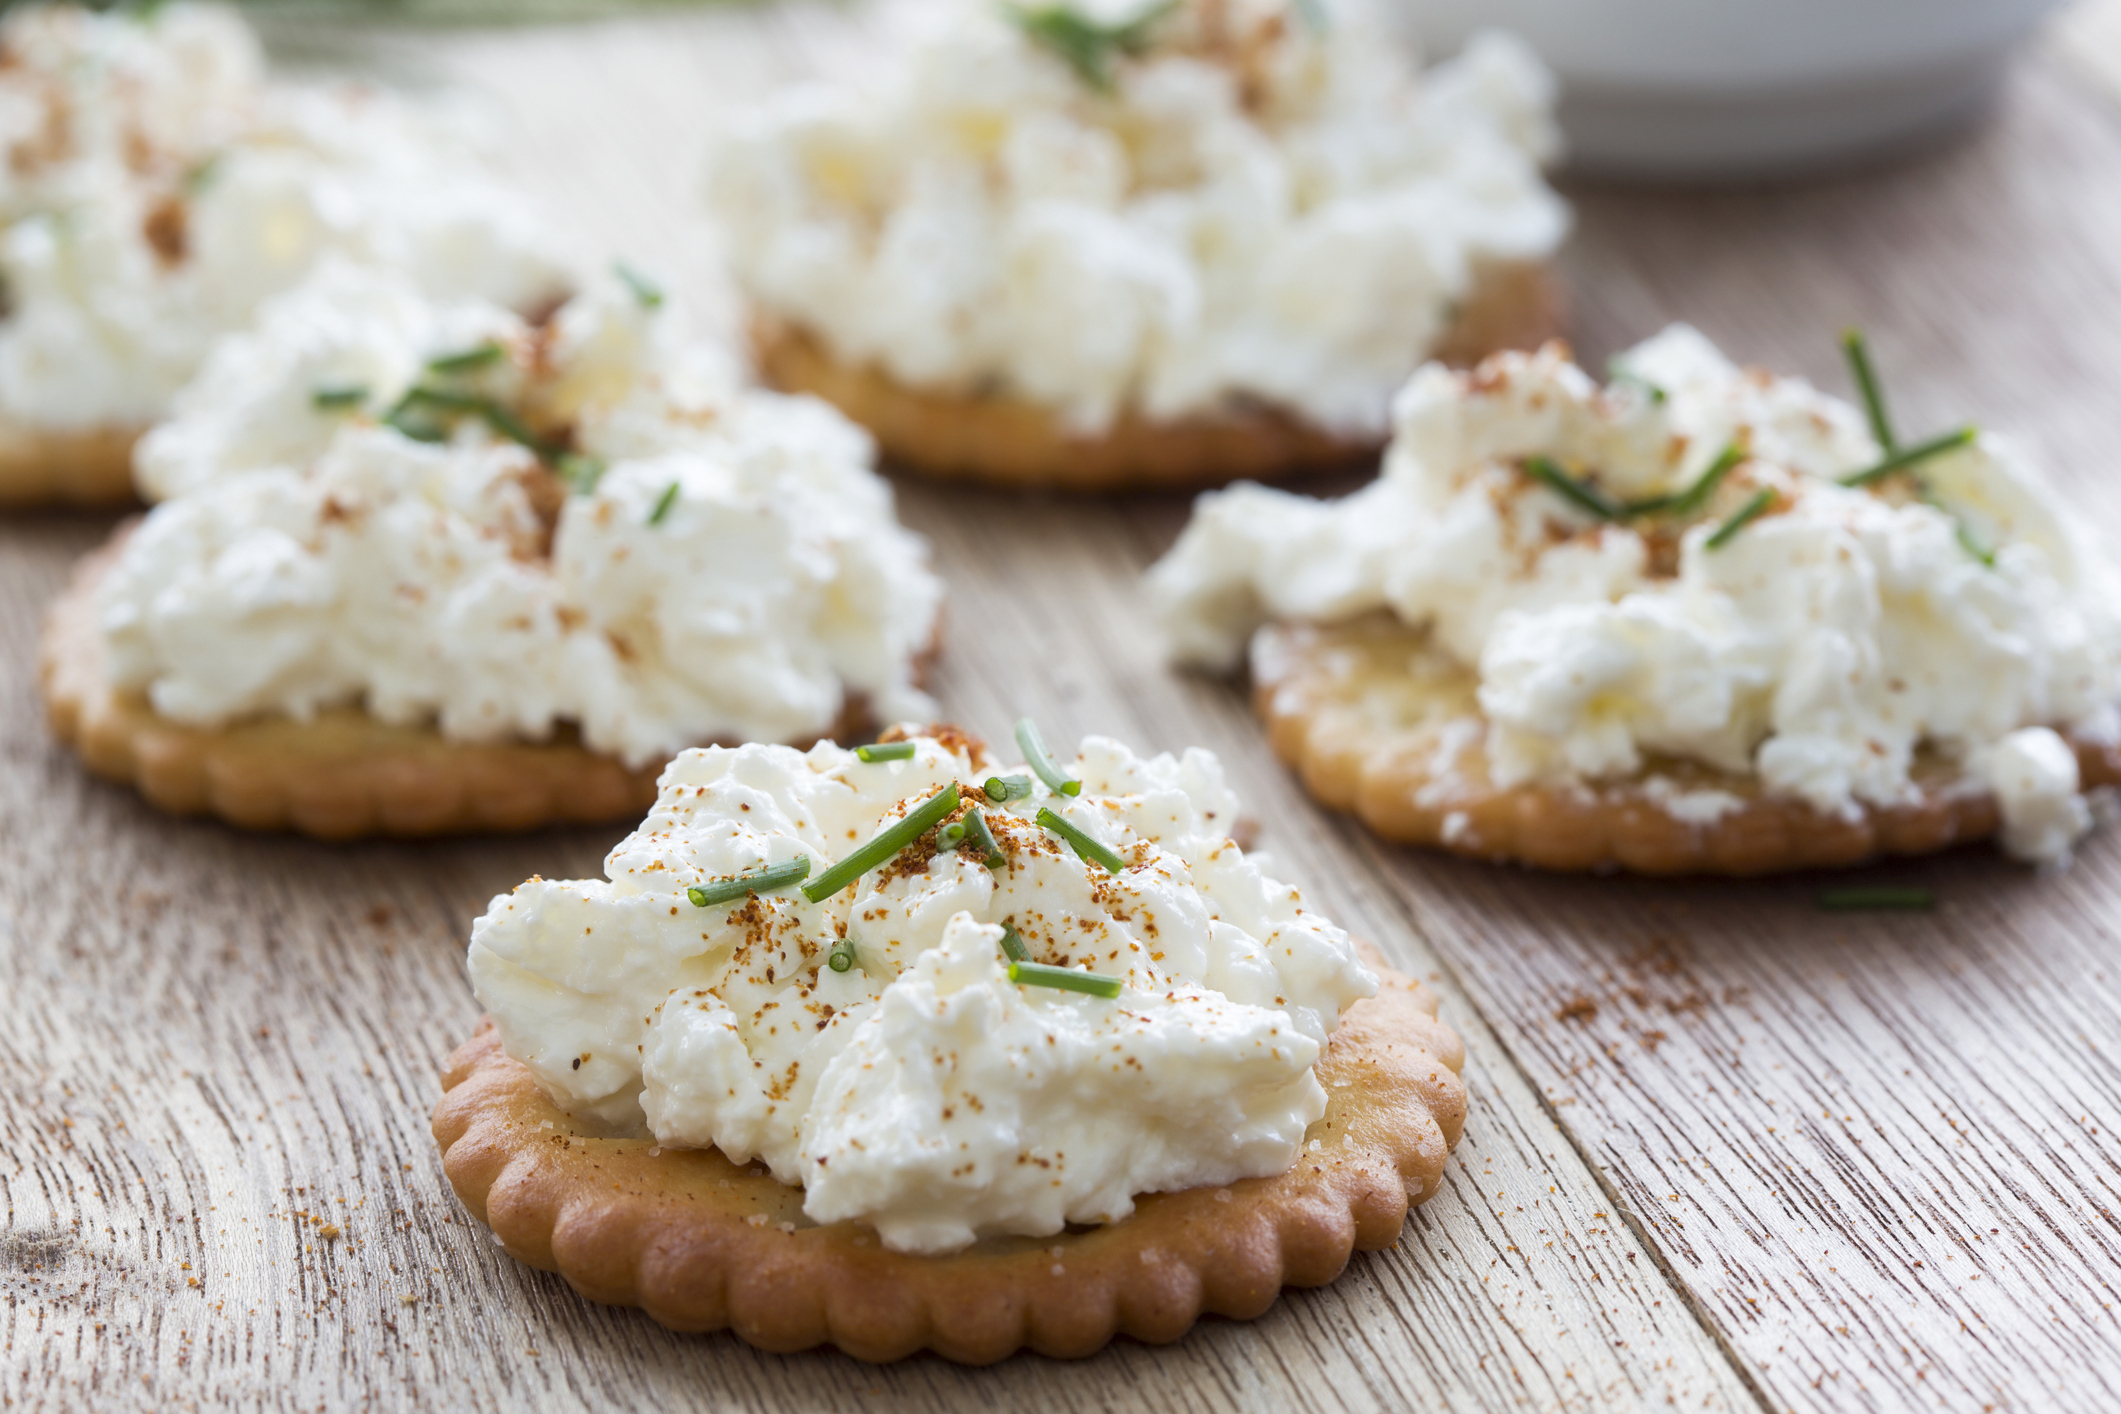 "Salticrax, South African cracker topped with cottage cheese with a sprinkling of cayenne pepper"